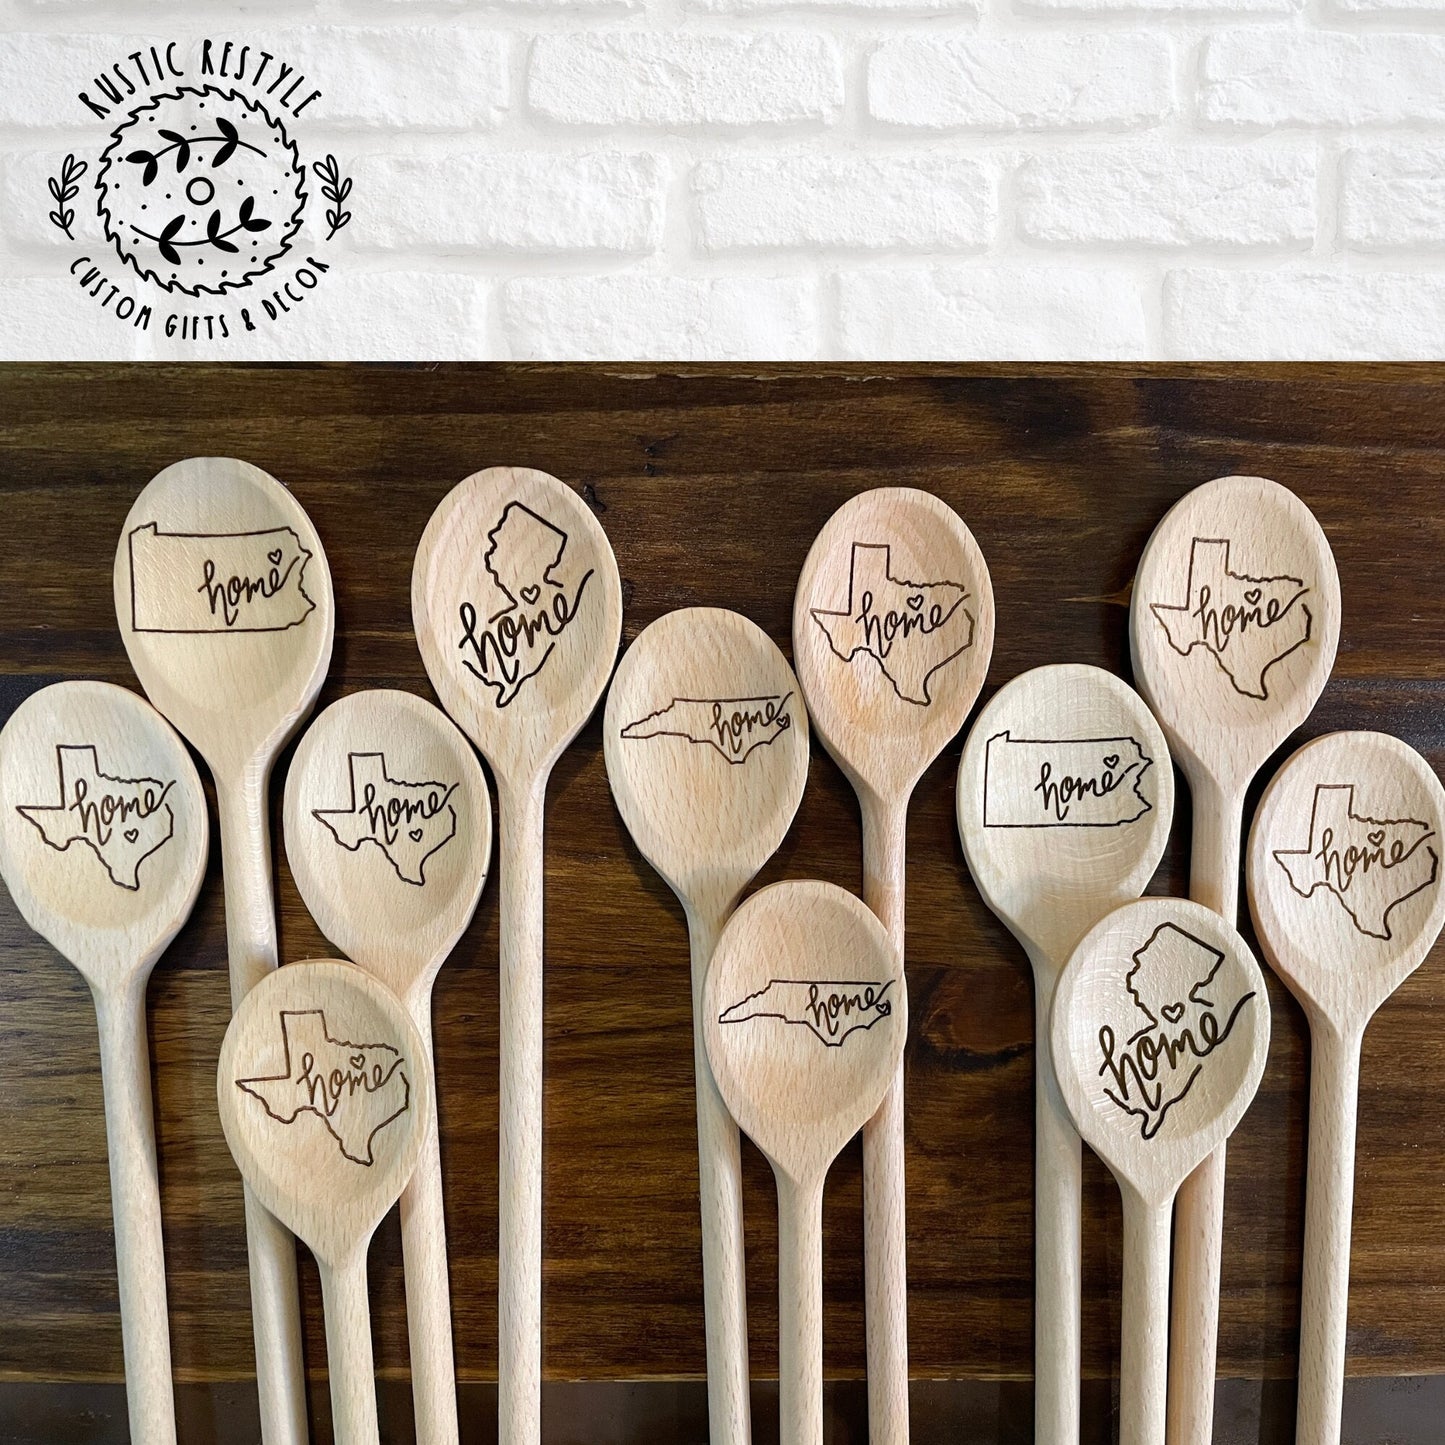 Wooden Spoons, Home state heart Spoon Gift